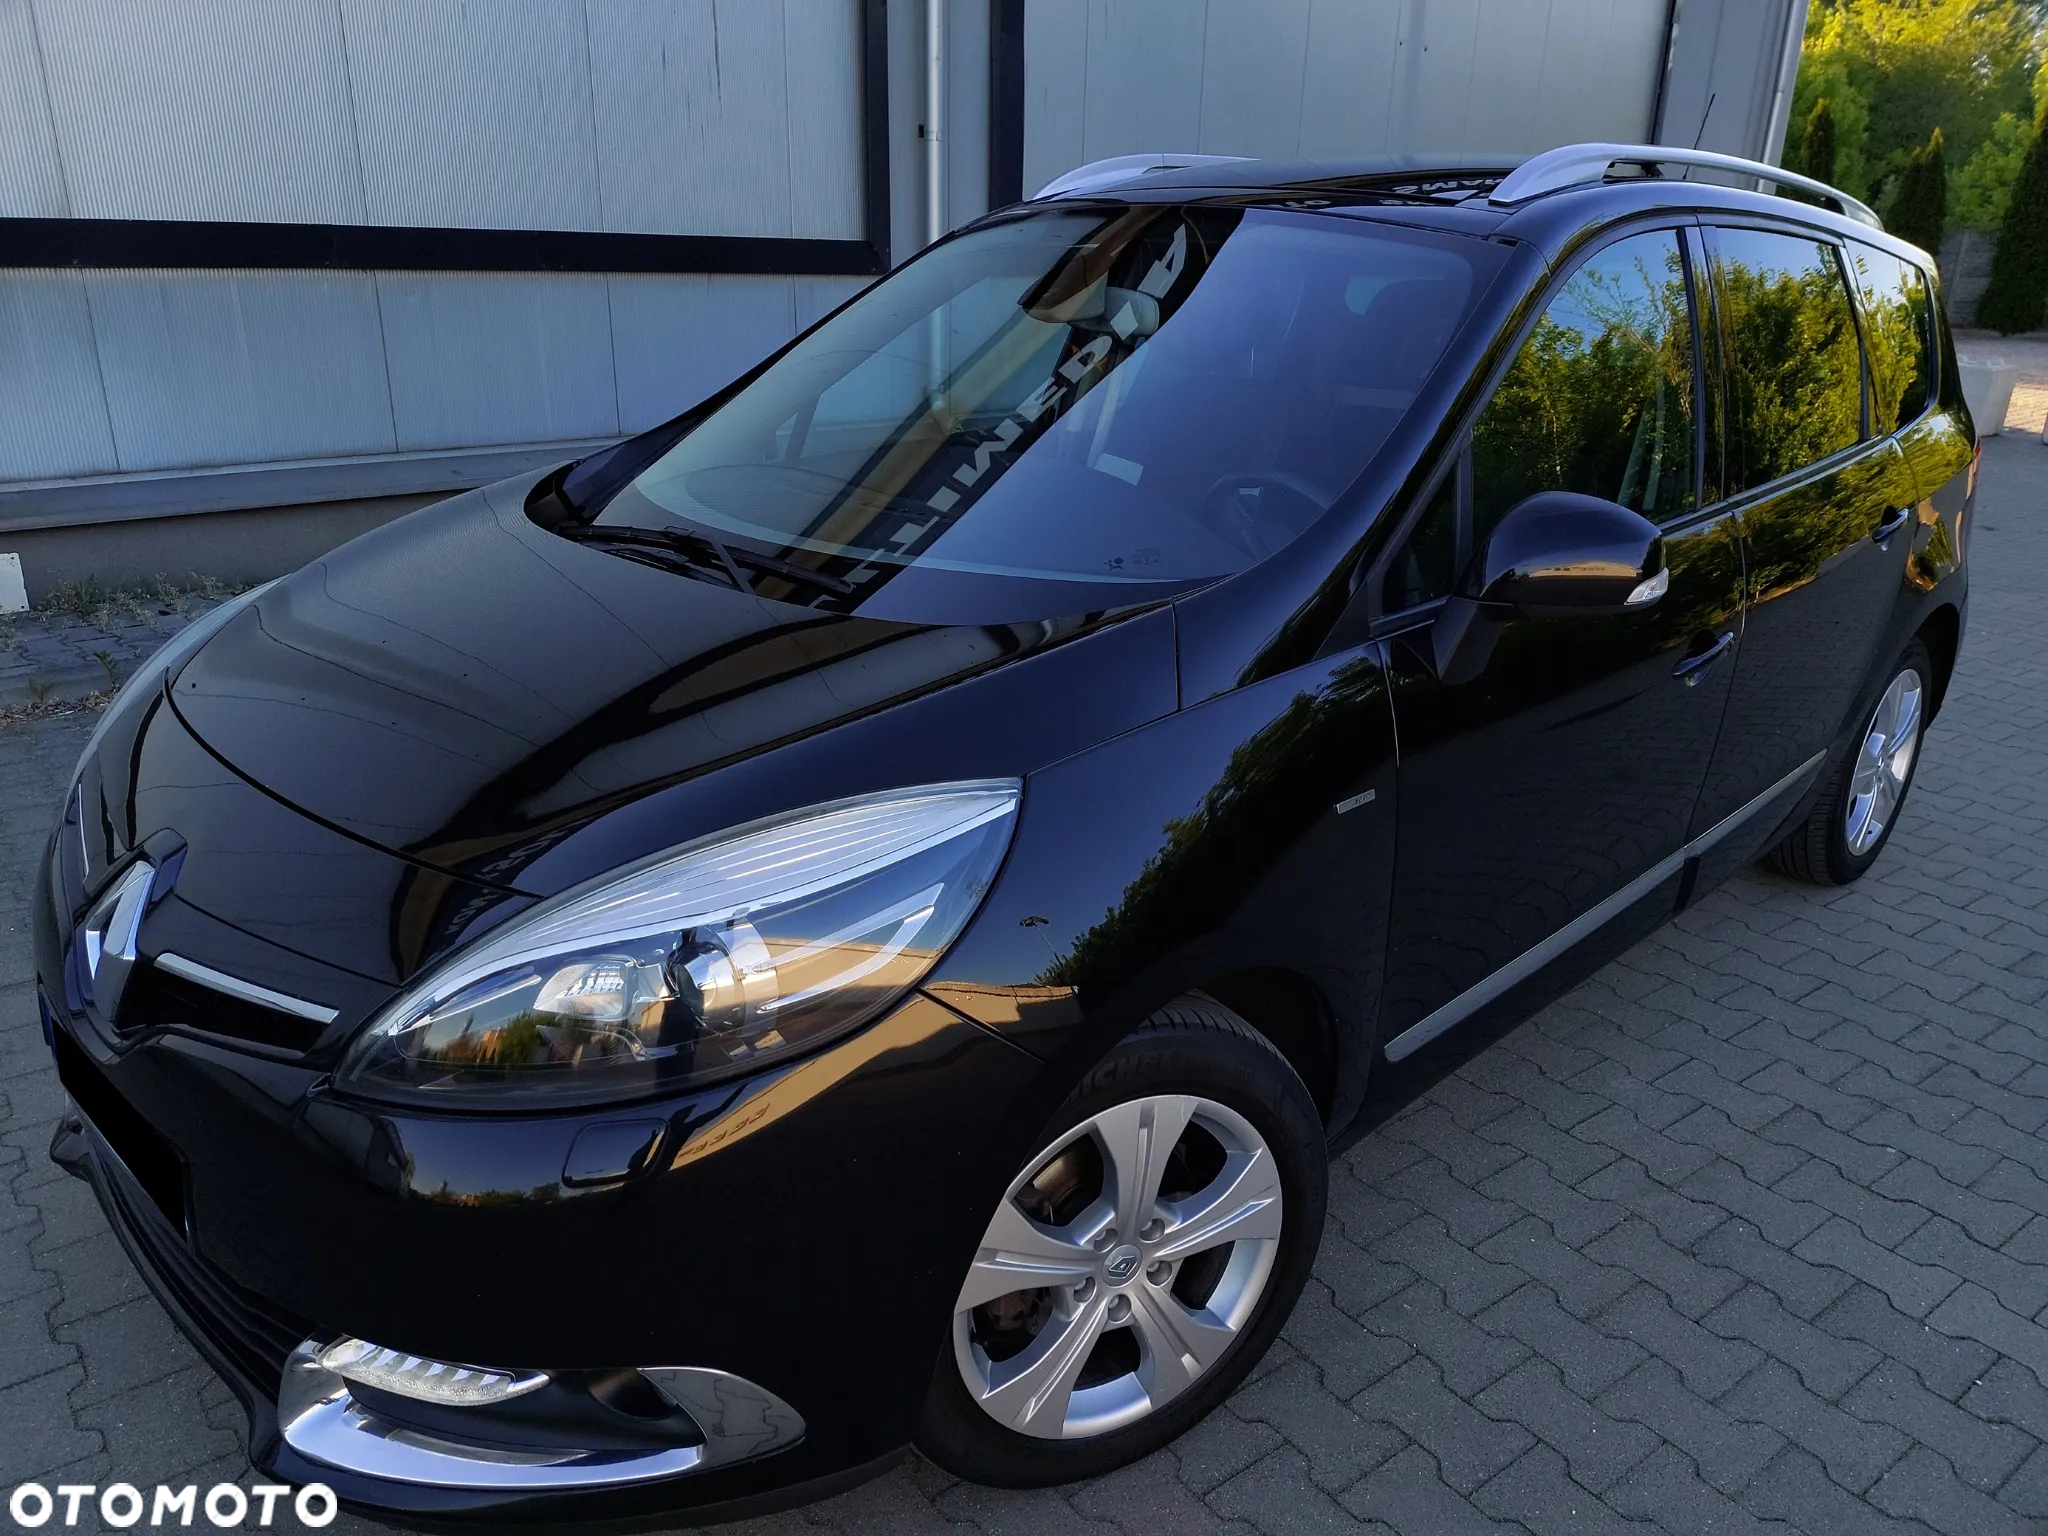 Renault Scenic 1.6 dCi Energy Bose Edition S&S - 5